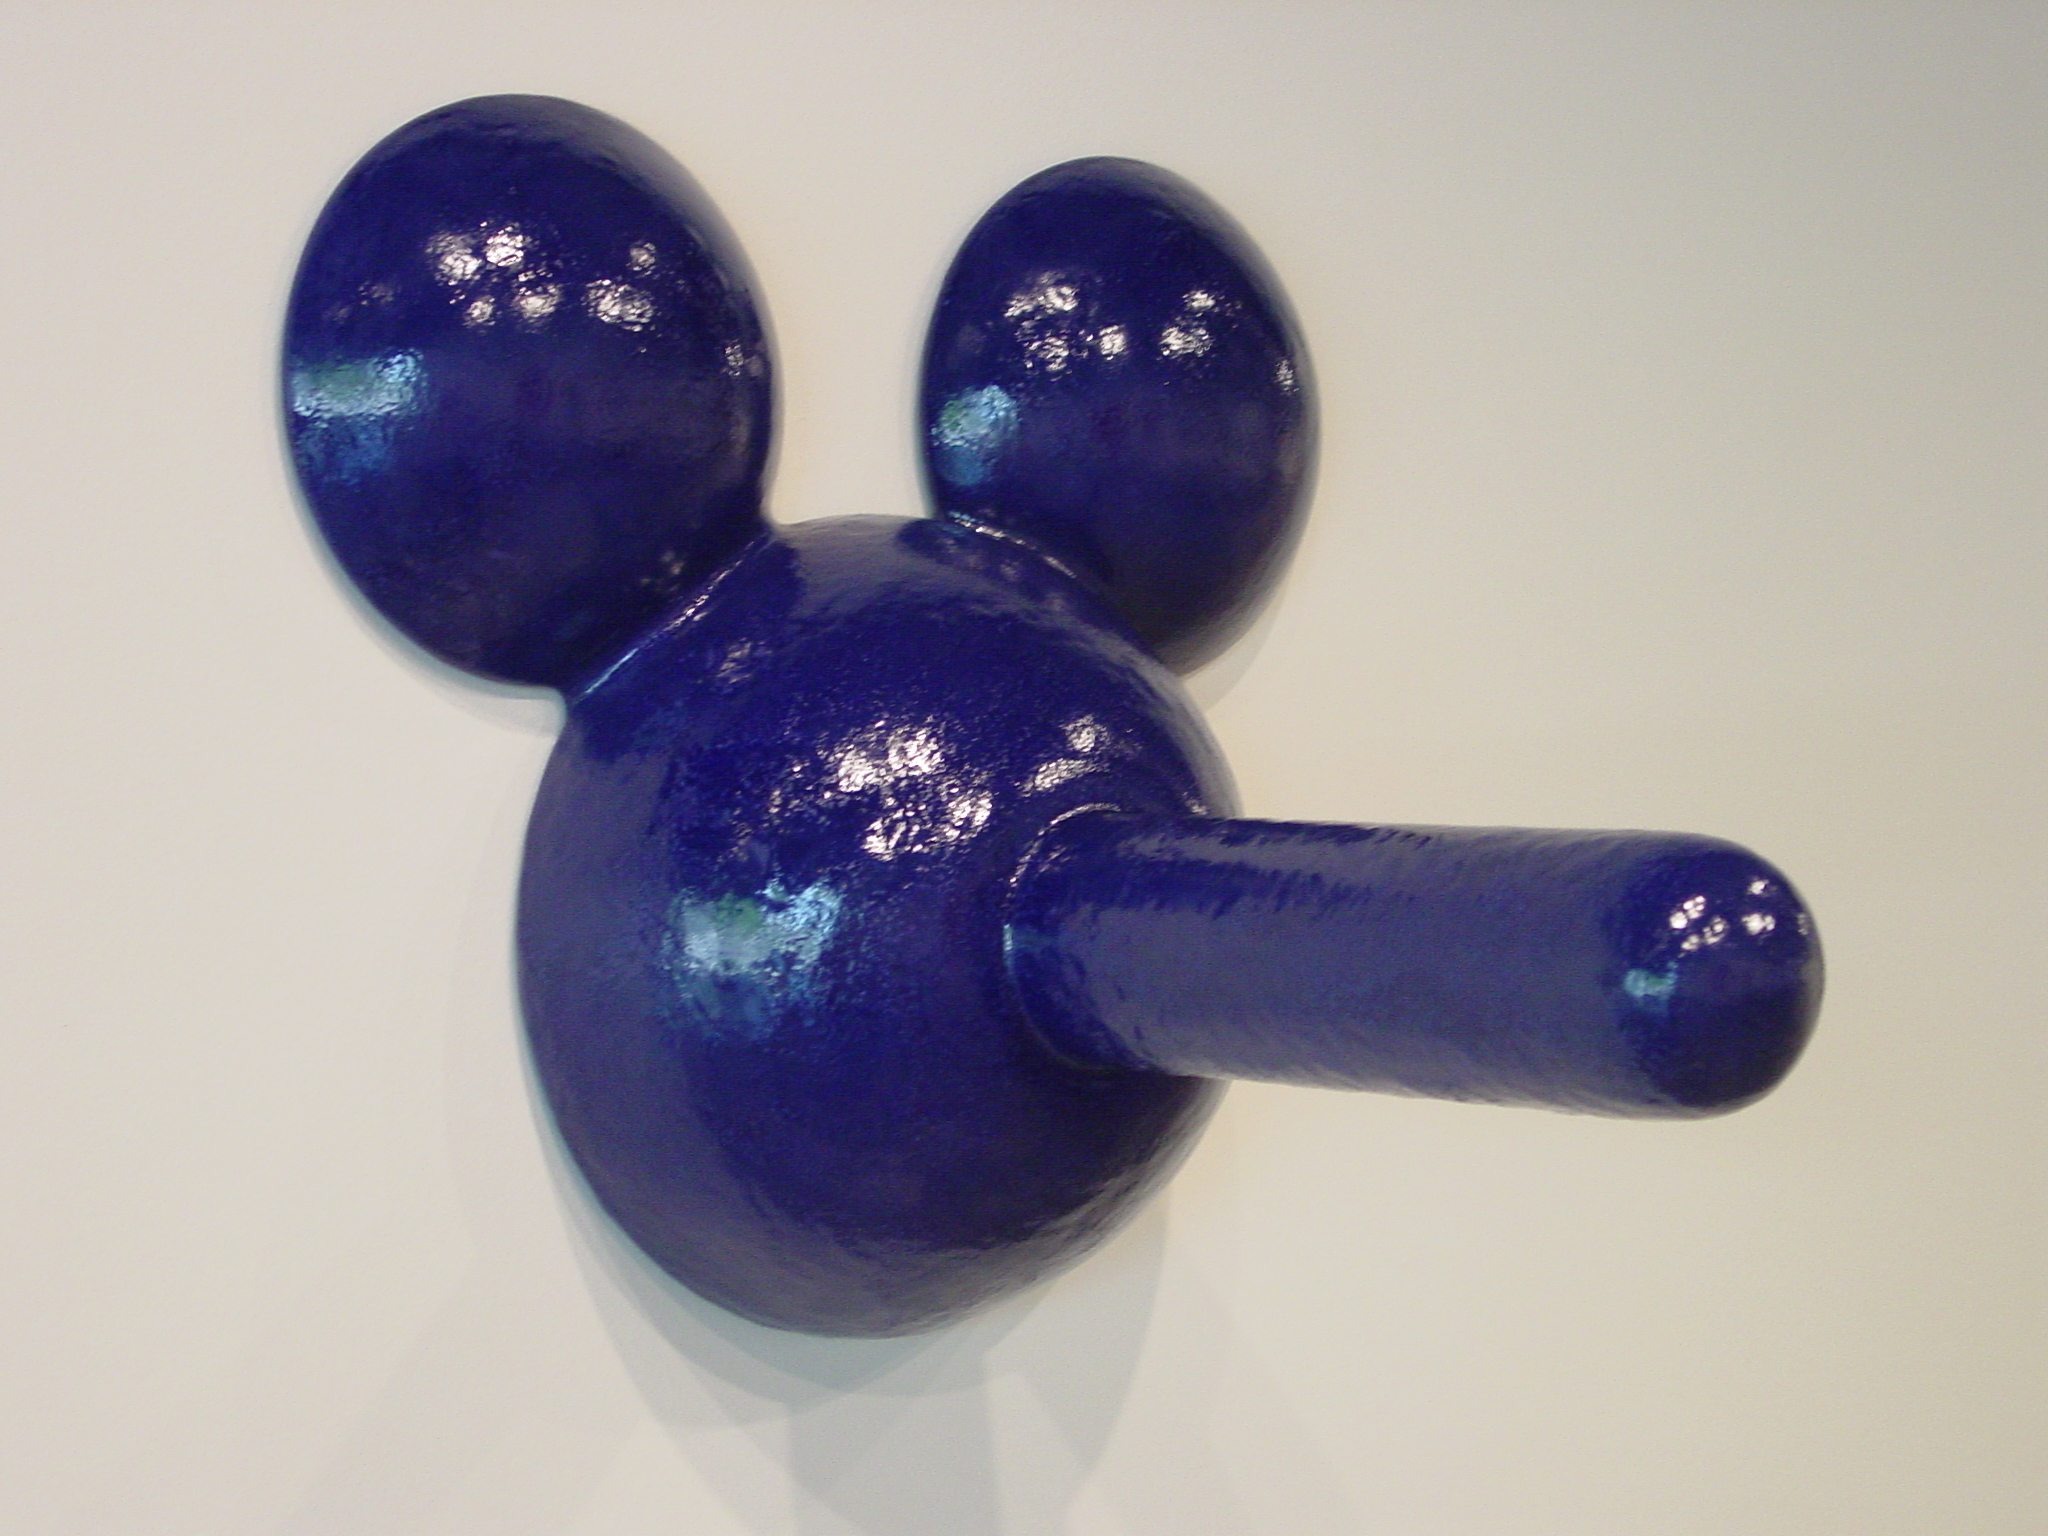 Ceramic form of Mickey Mouse with an elongated nose like Pinocchio.